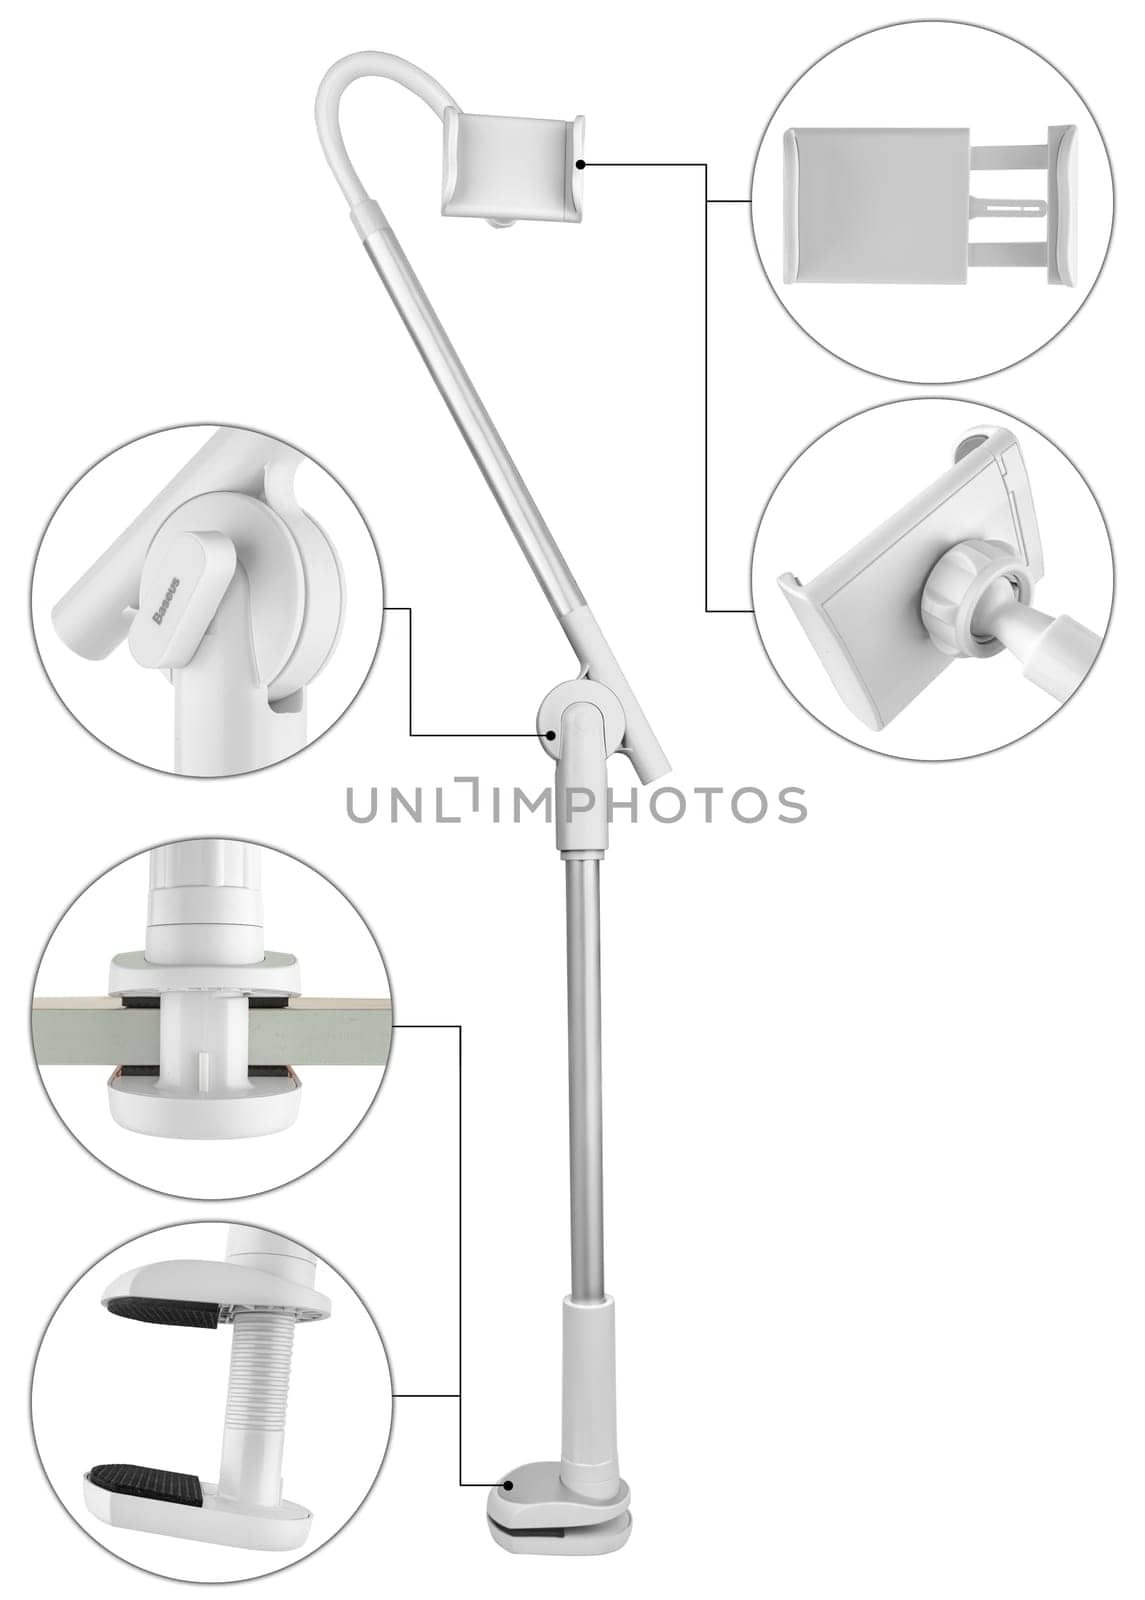 tripod for bloggers phone, on a white background in isolation